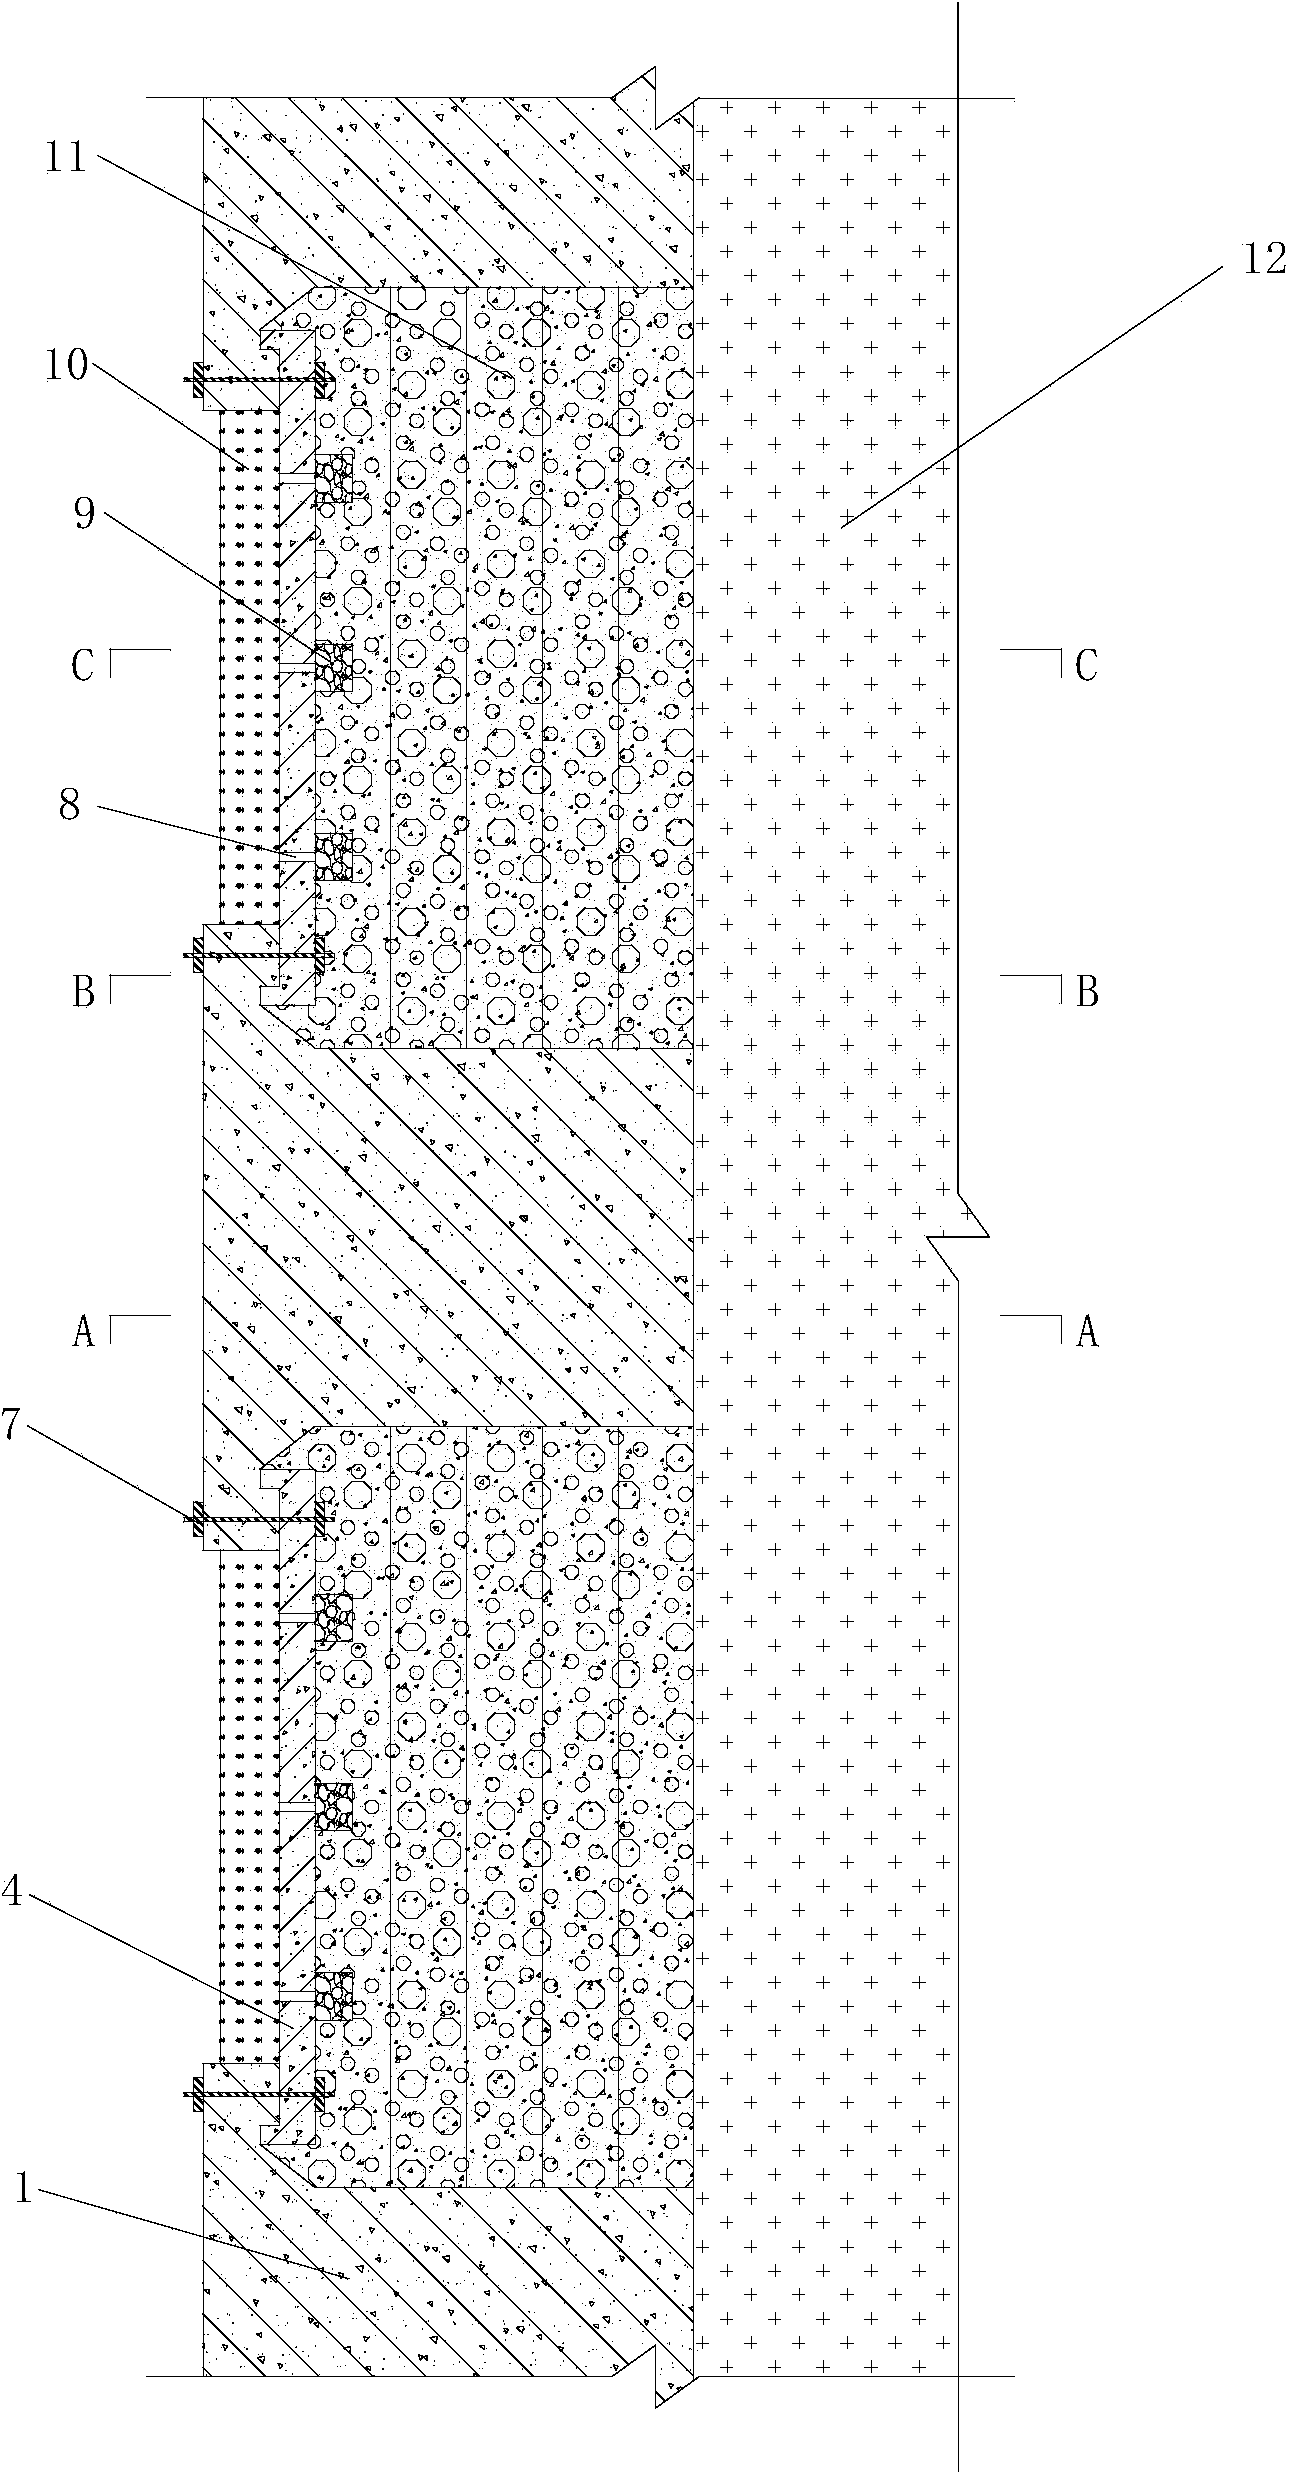 Construction method for cast-in-place prefabricated combined type earth-retaining wall structure